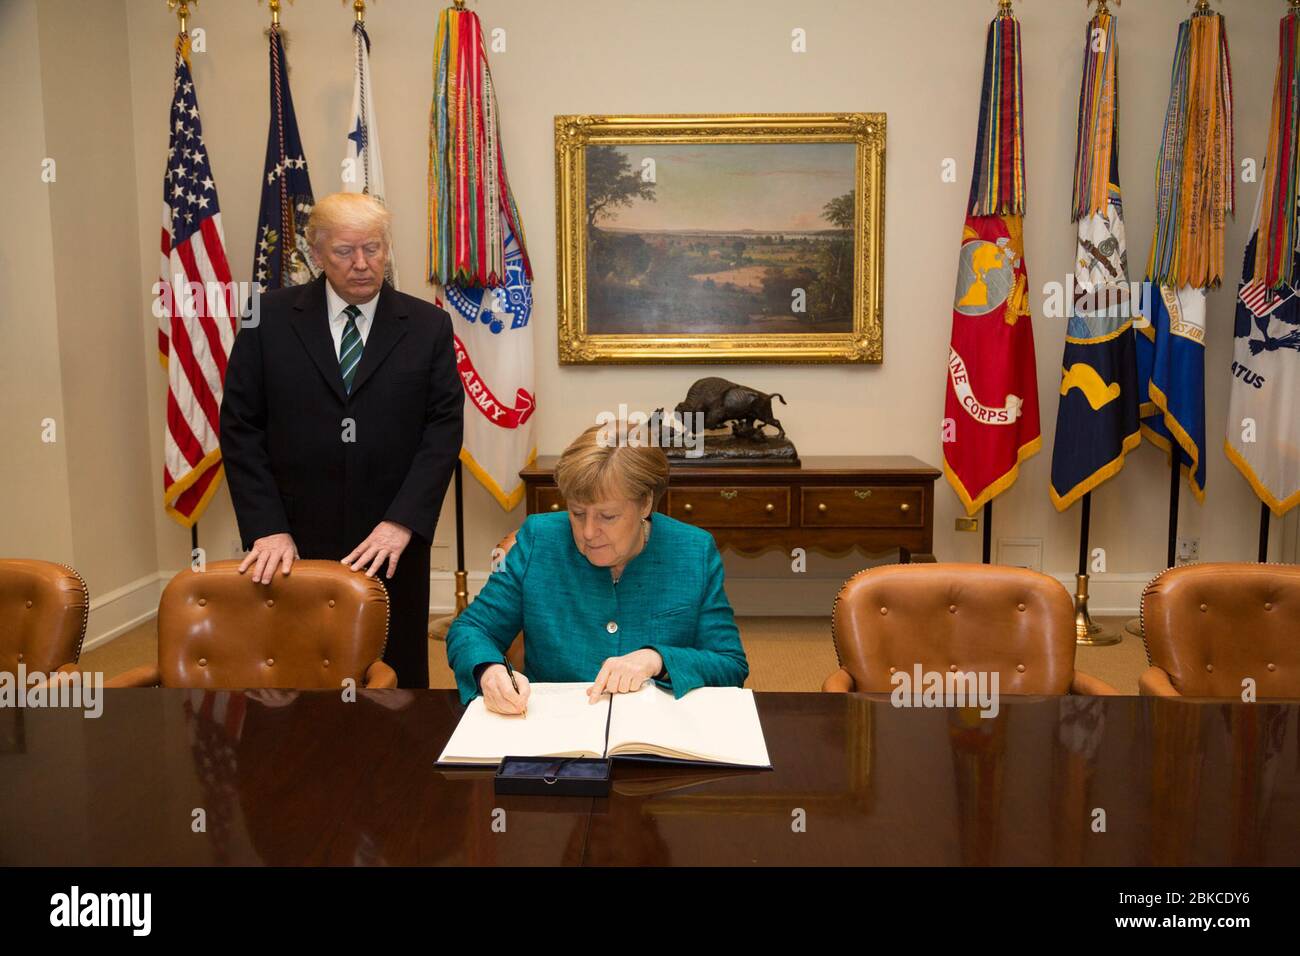 President Donald Trump accompanies German Chancellor Angela Merkel as she signs the guest book, Friday, March 17, 2017, in the Roosevelt Room, during her official visit to the White House in Washington, D.C. Foreign Leader Visits Stock Photo